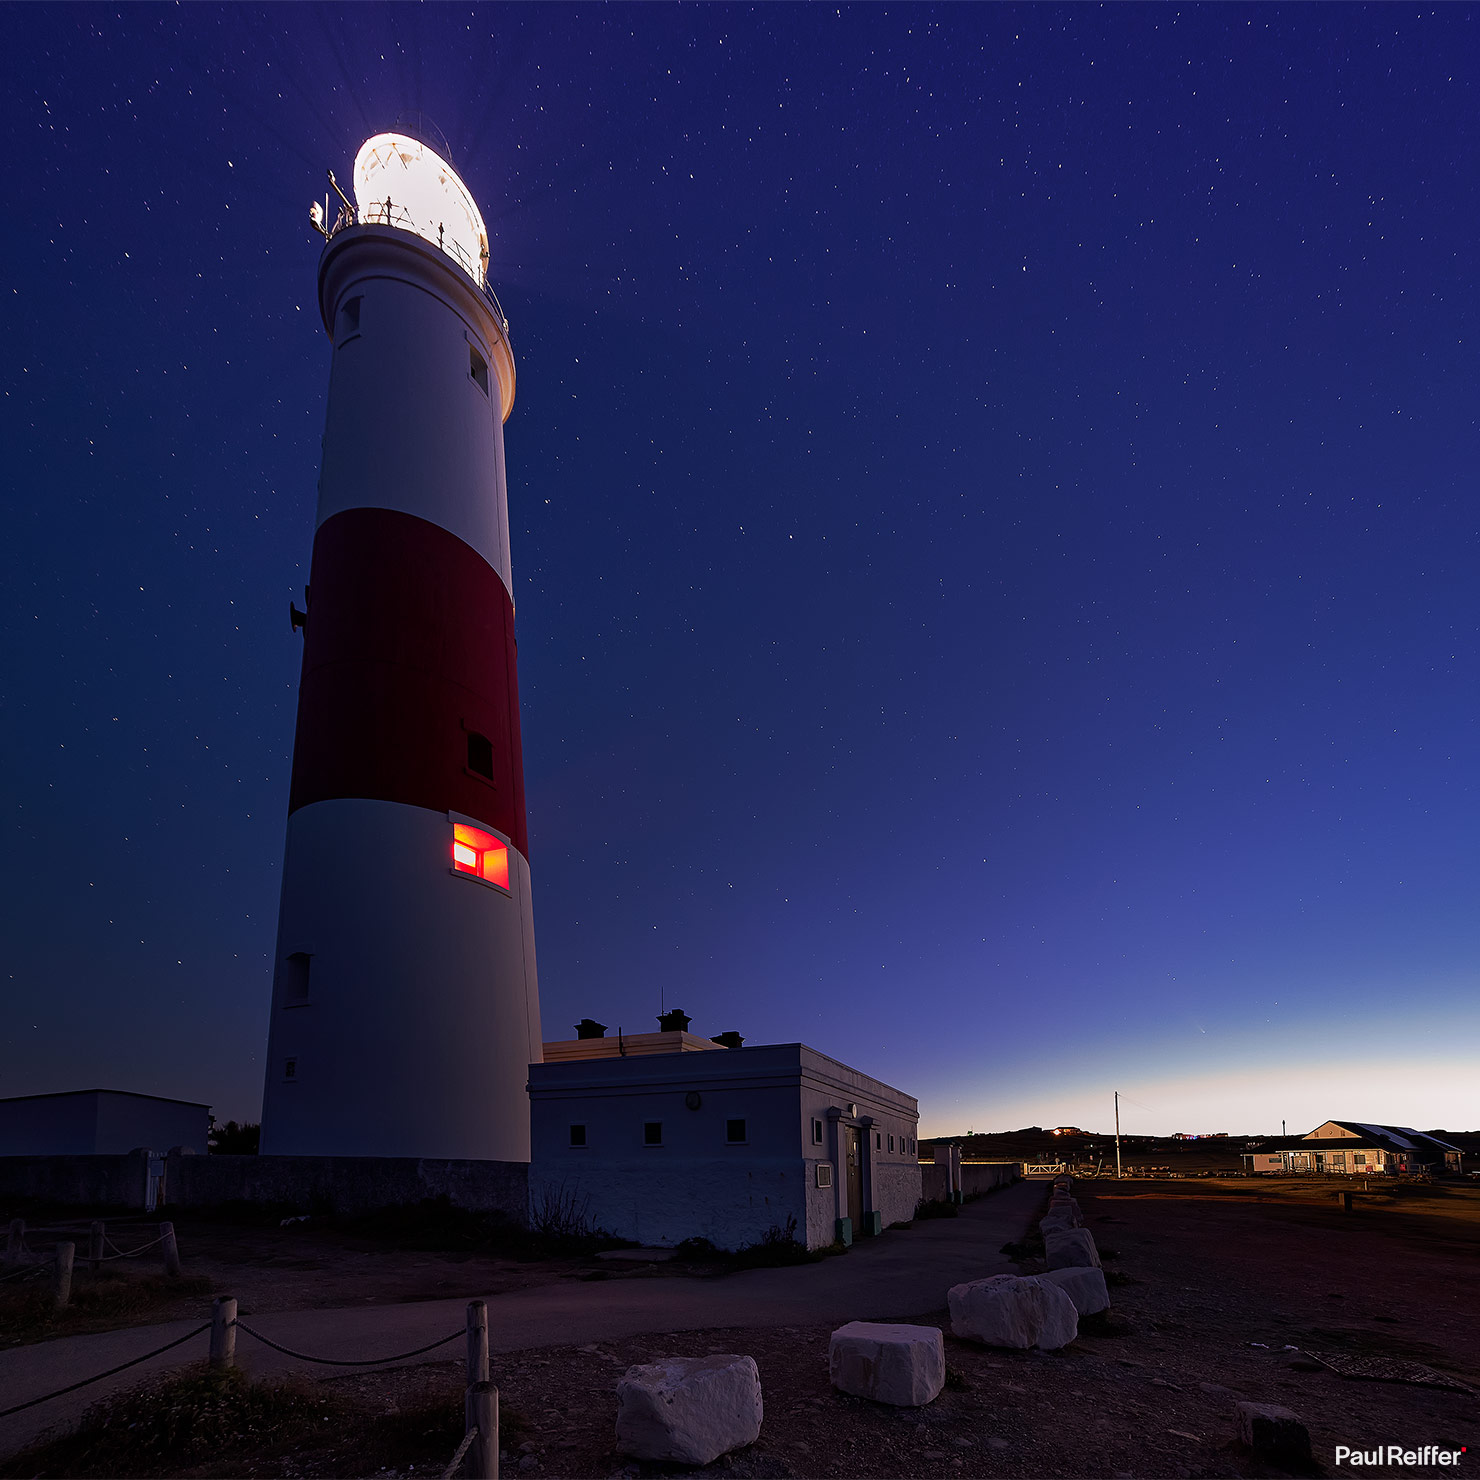 Searching For Comet Neowise F3 Galaxy Portland Biil Lighthouse Canon EOS R Astrophotography Samyang 14mm Lens Stars Location Jurassic Coast South Paul Reiffer